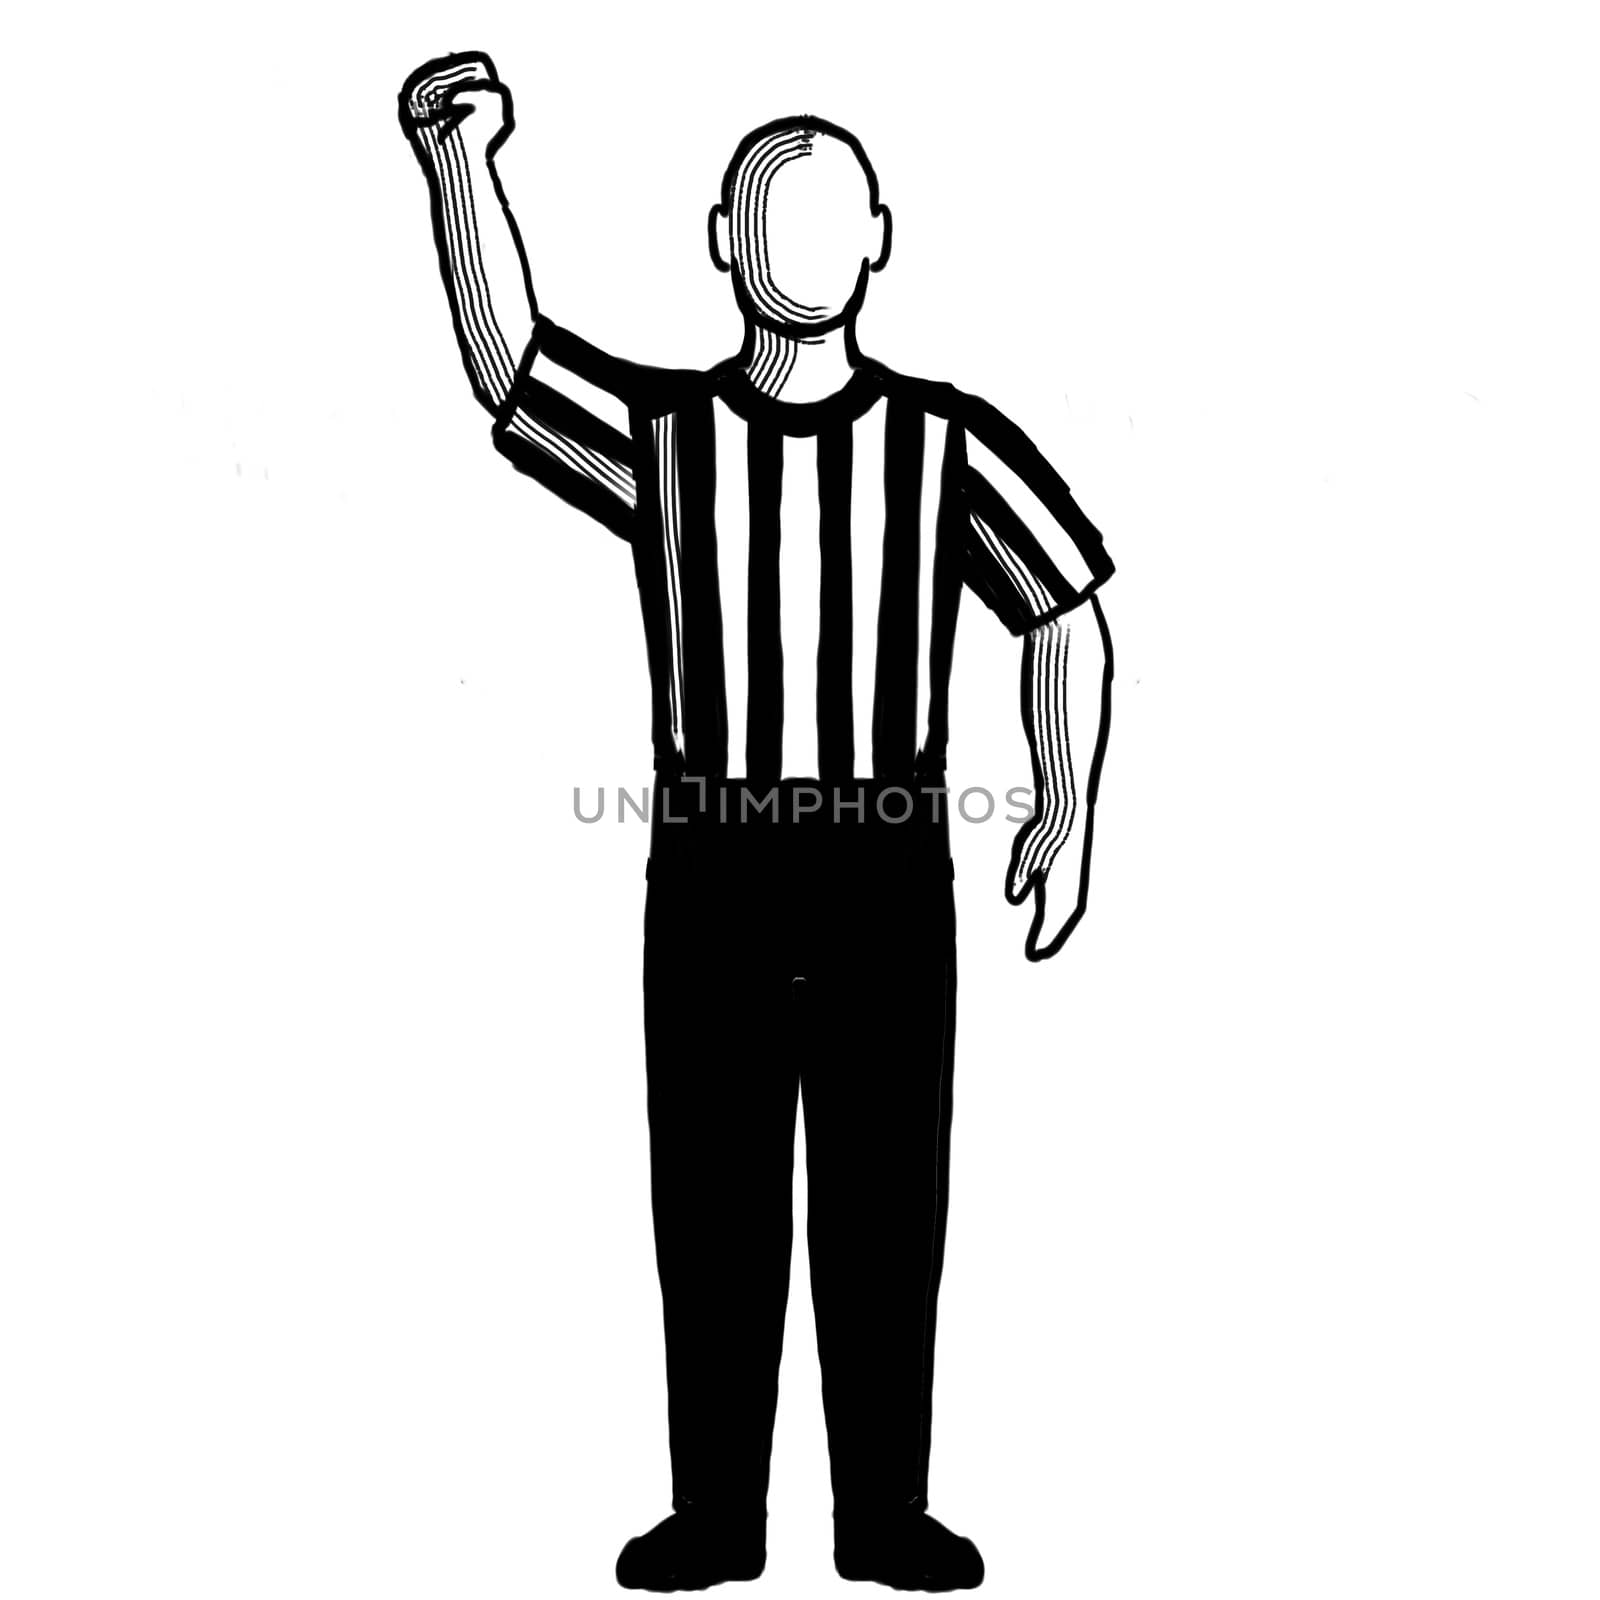 Black and white illustration of a basketball referee or official with hand signal showing stop clock for foul viewed from front on isolated background done retro style.